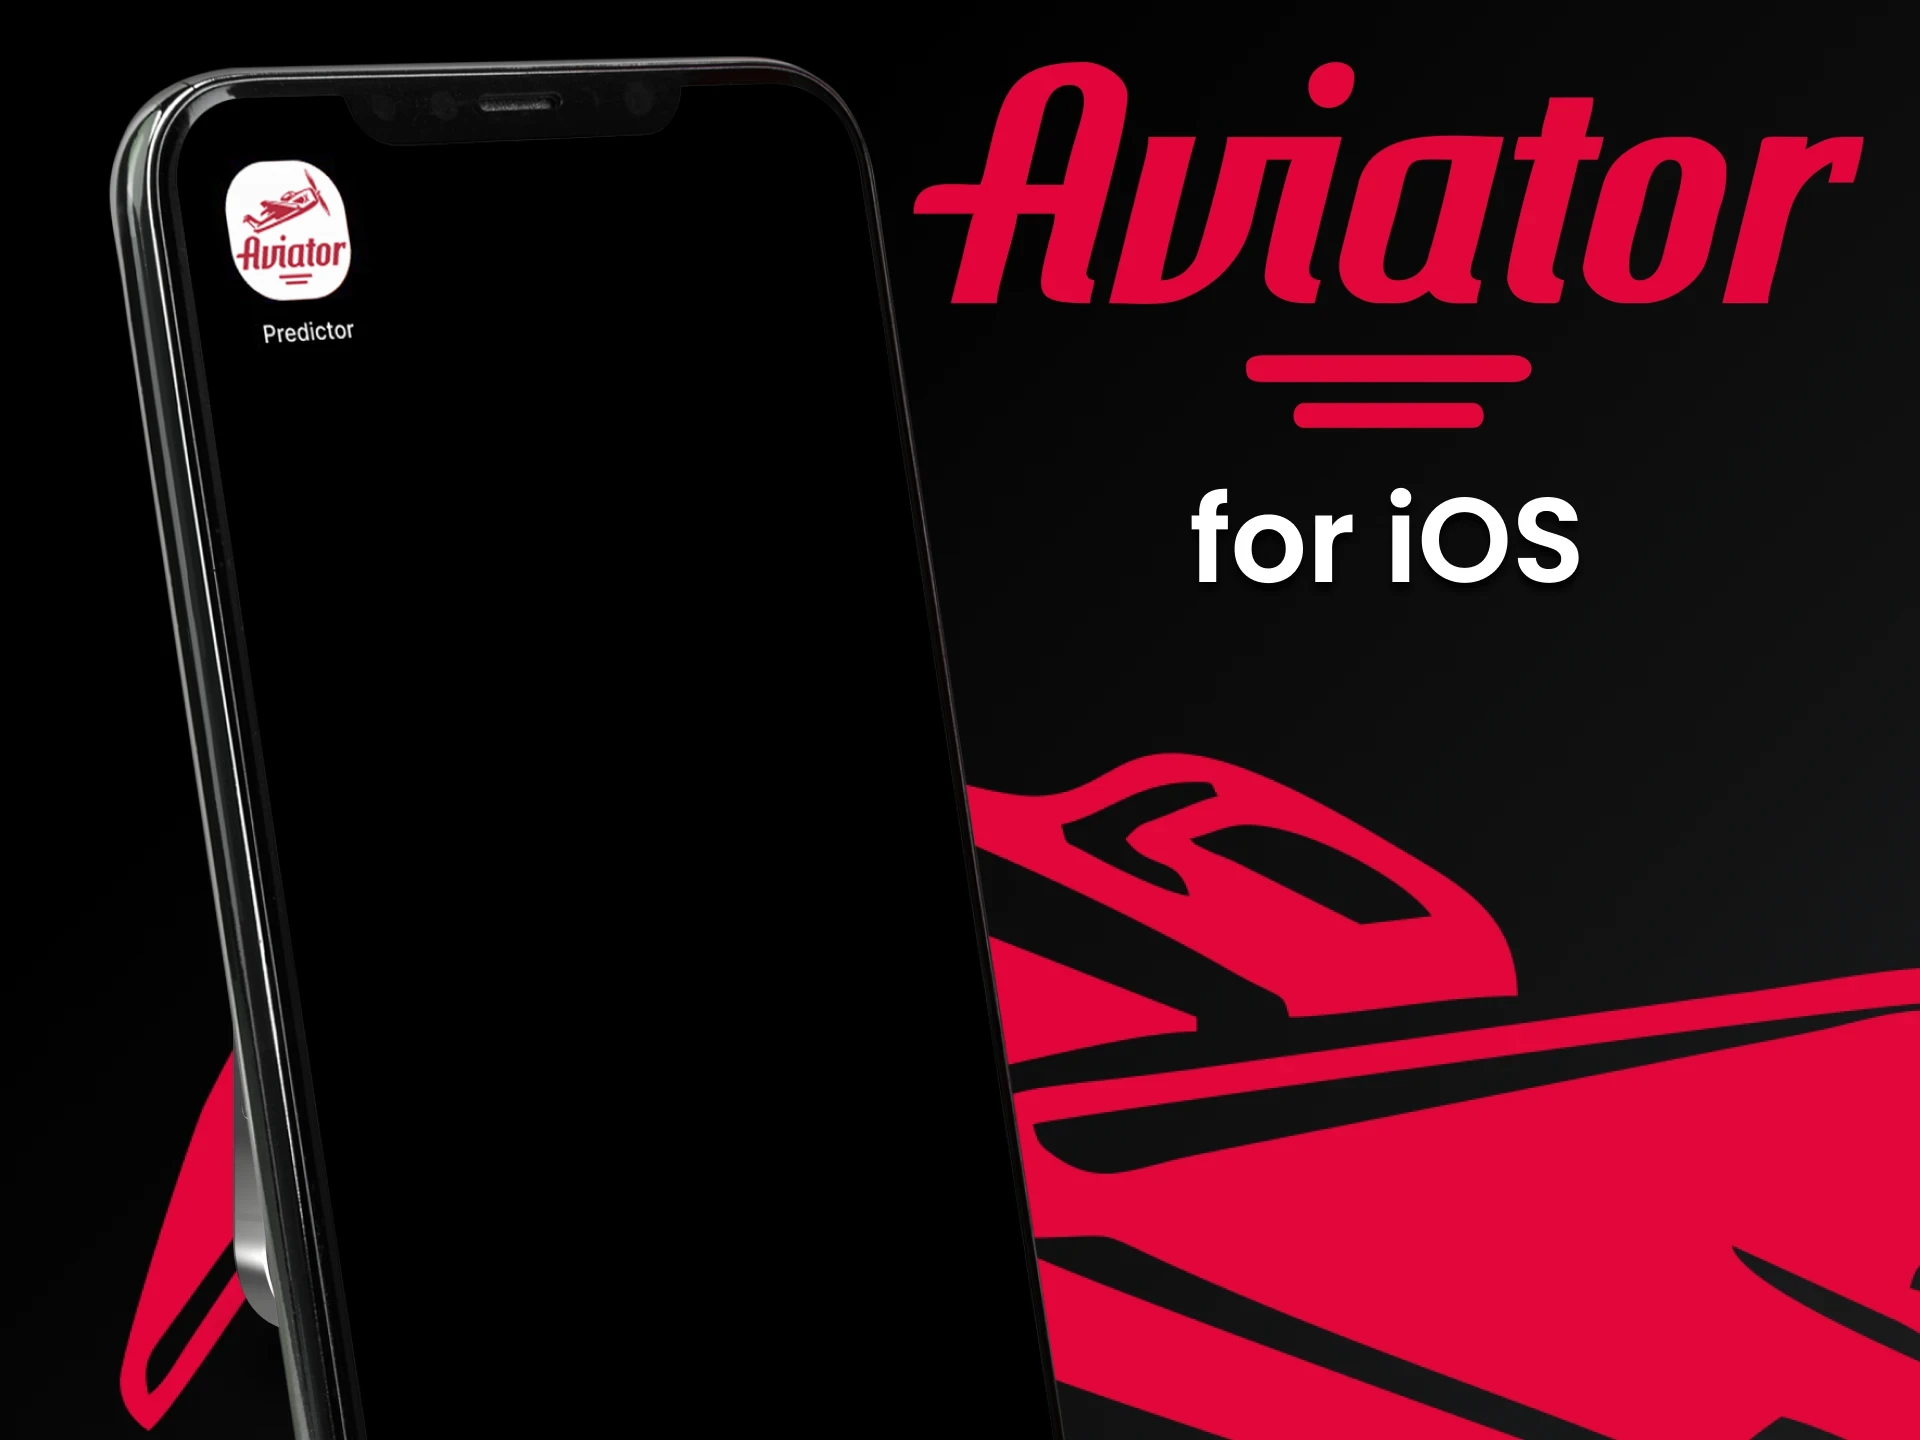 You can use software to play Aviator on an iOS device